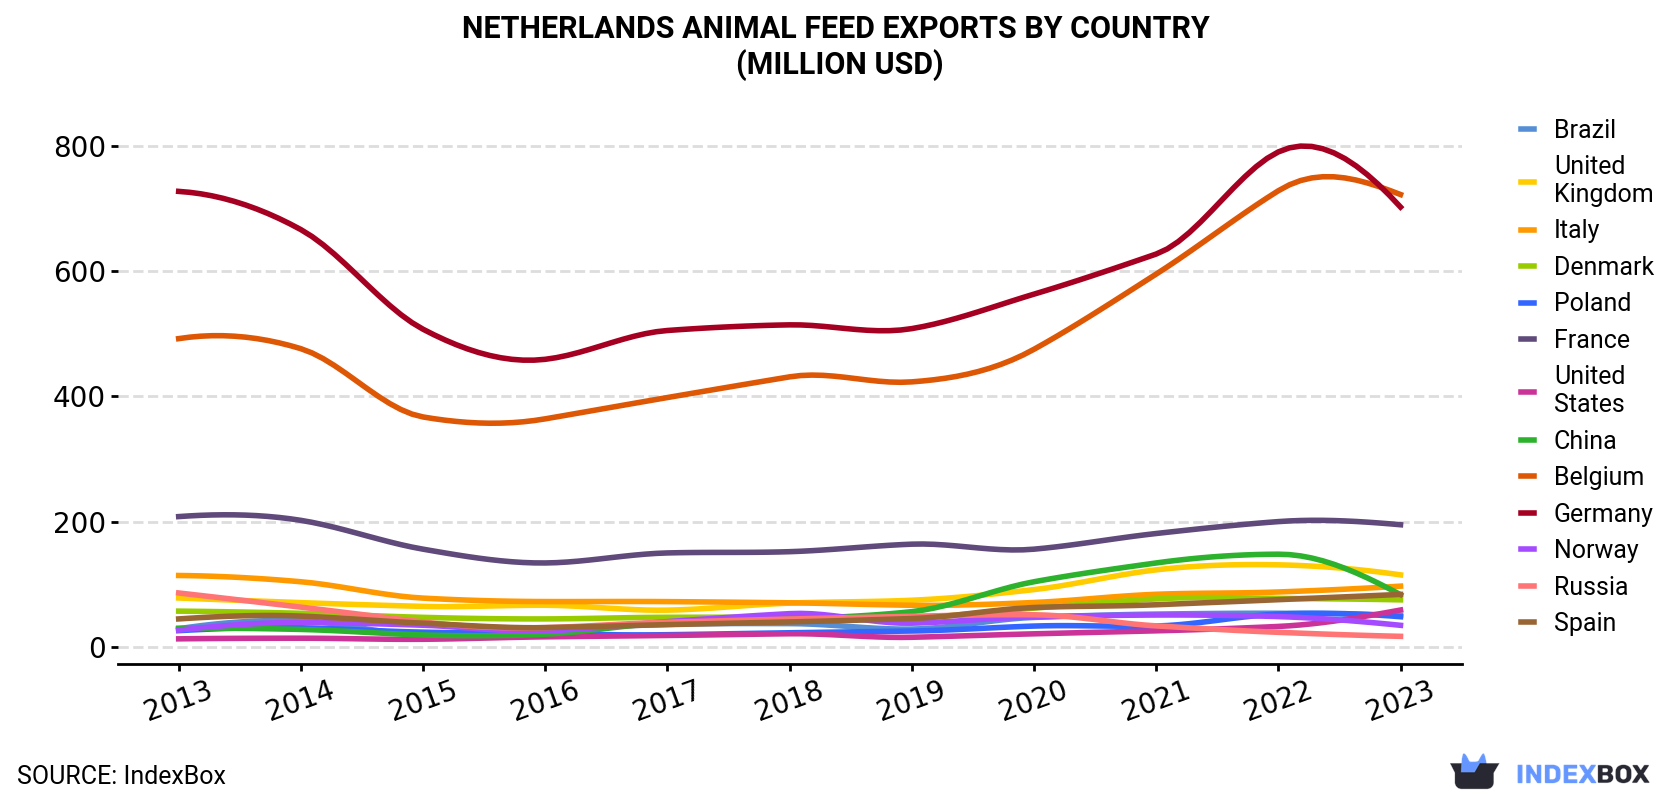 Netherlands Animal Feed Exports By Country (Million USD)